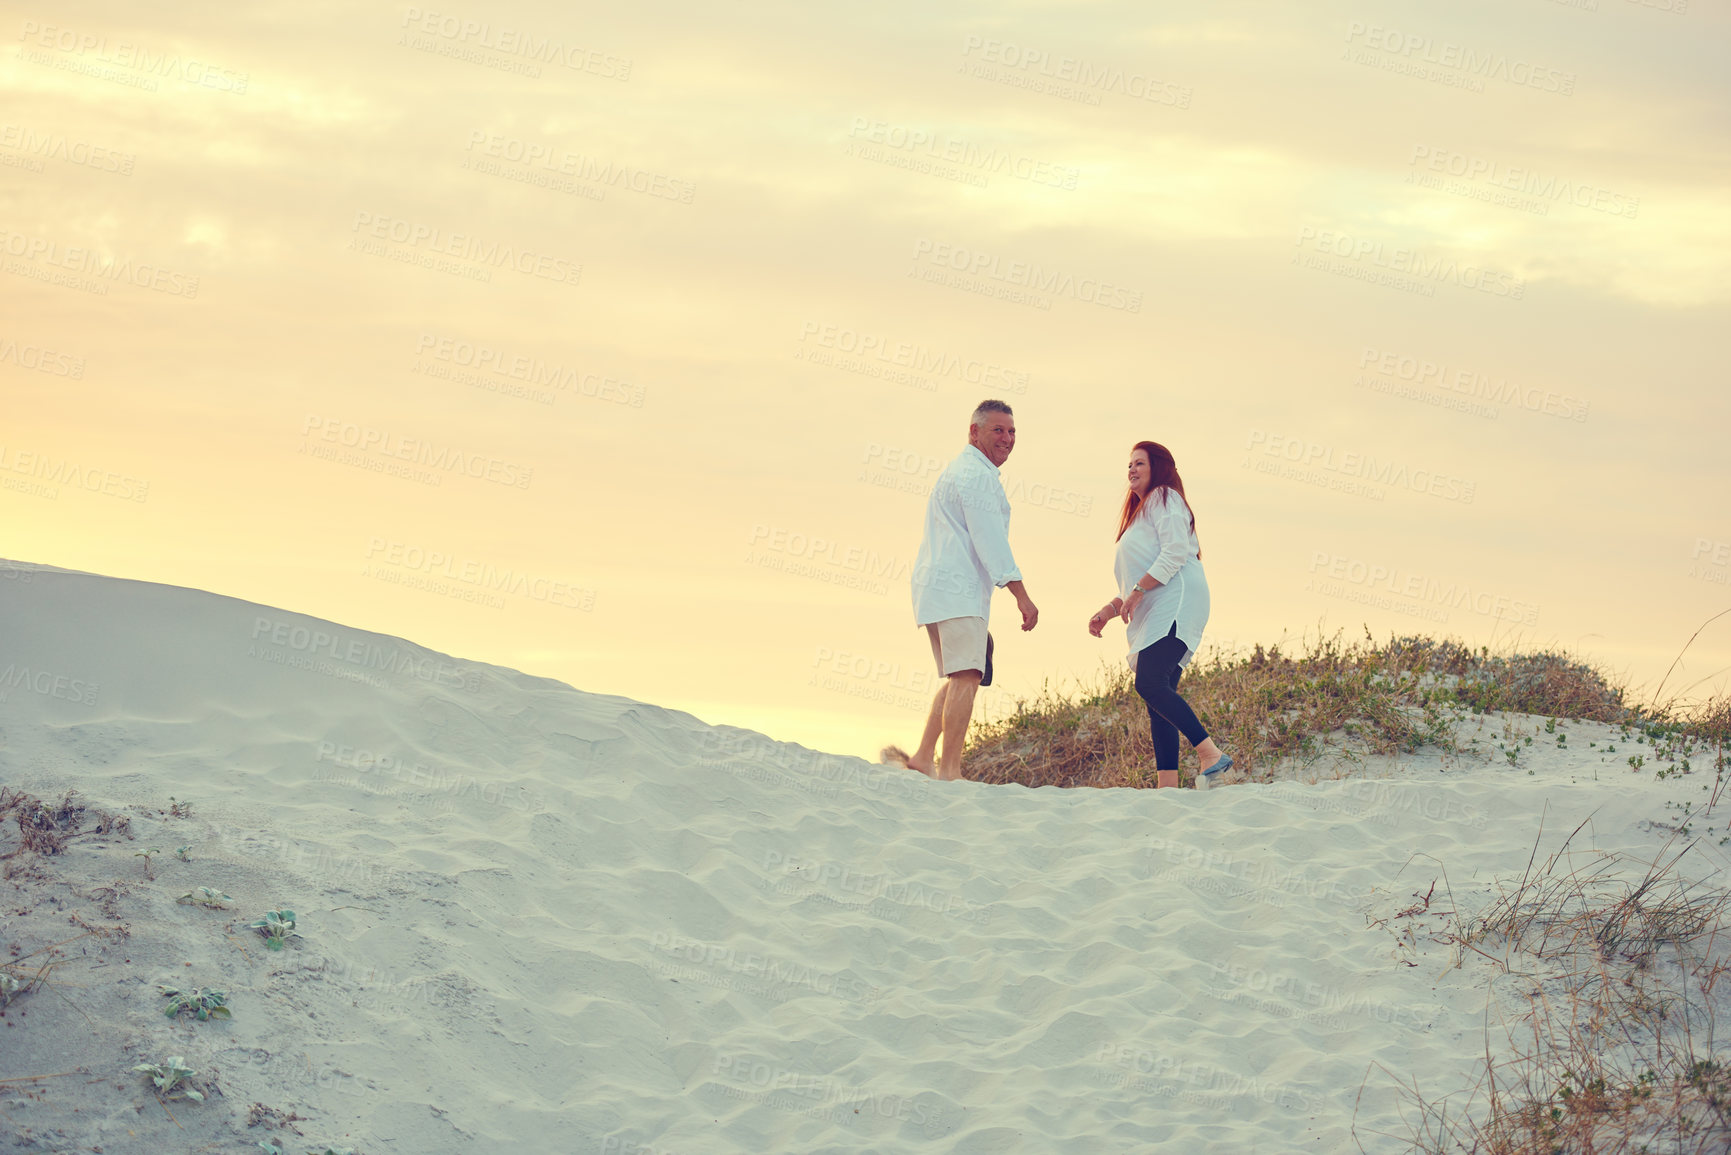 Buy stock photo Shot of mature people standing on a sand dune at the beach